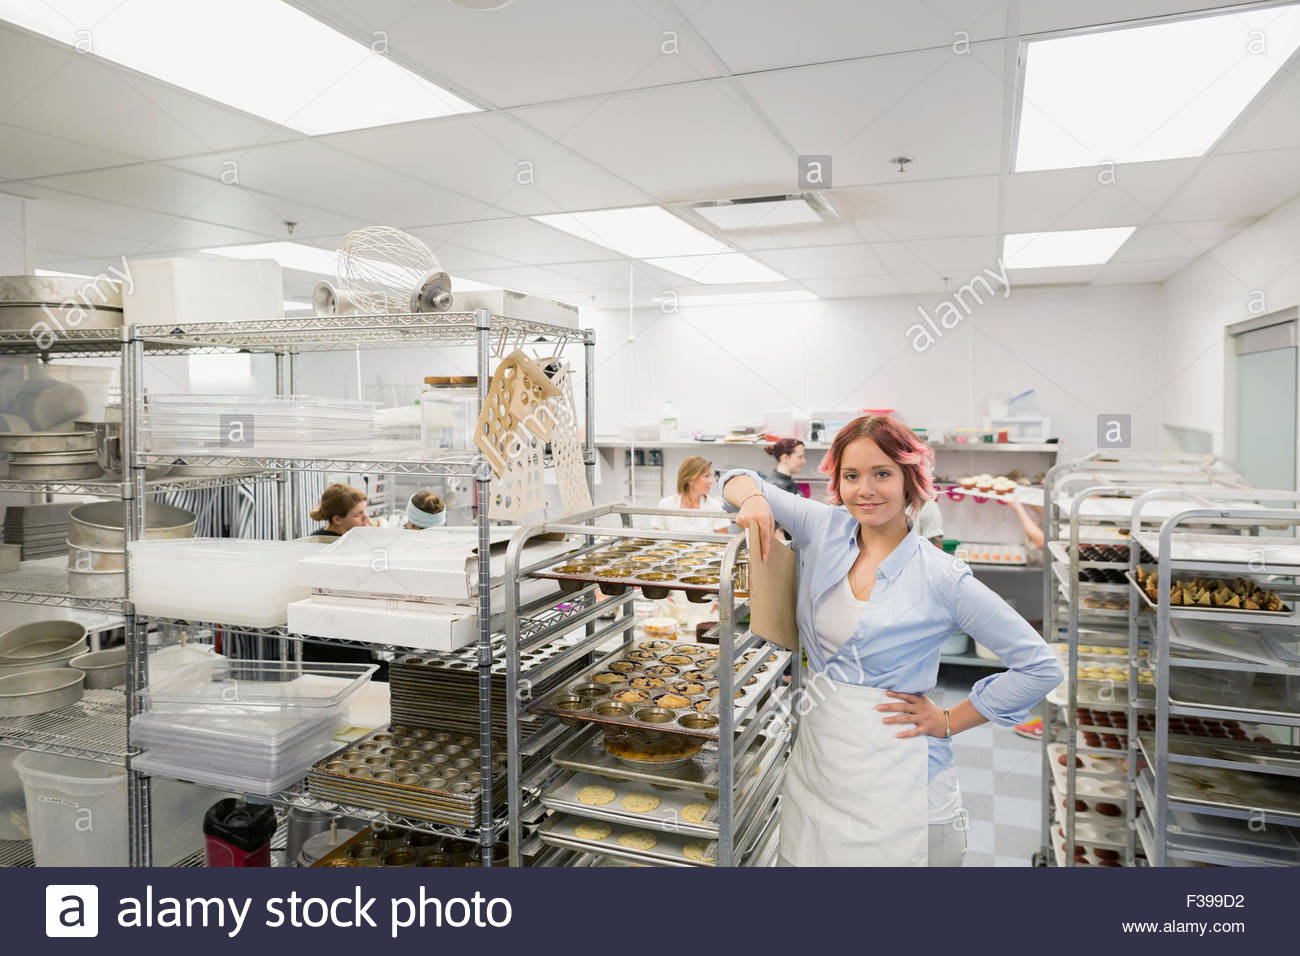 Portrait confident pastry chef in commercial kitchen Stock Photo